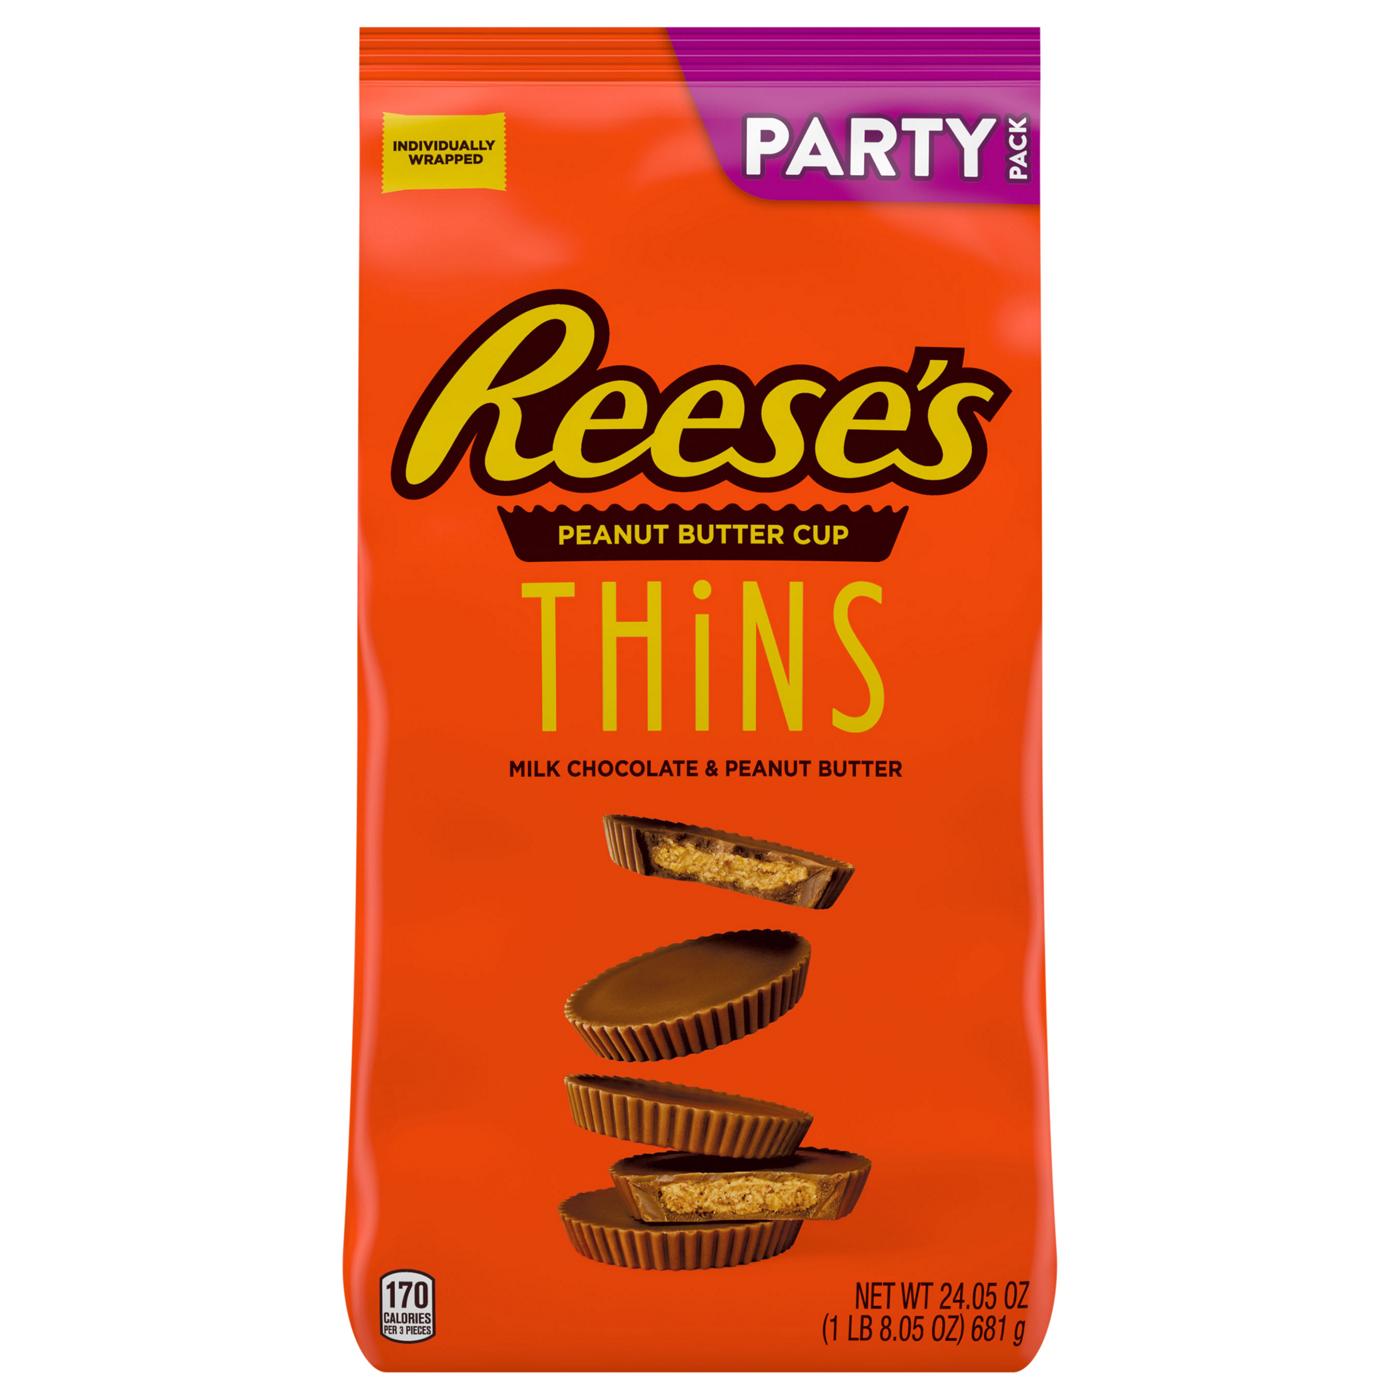 Reese's Miniature Peanut Butter Cups Candy - Party Pack - Shop Candy at  H-E-B